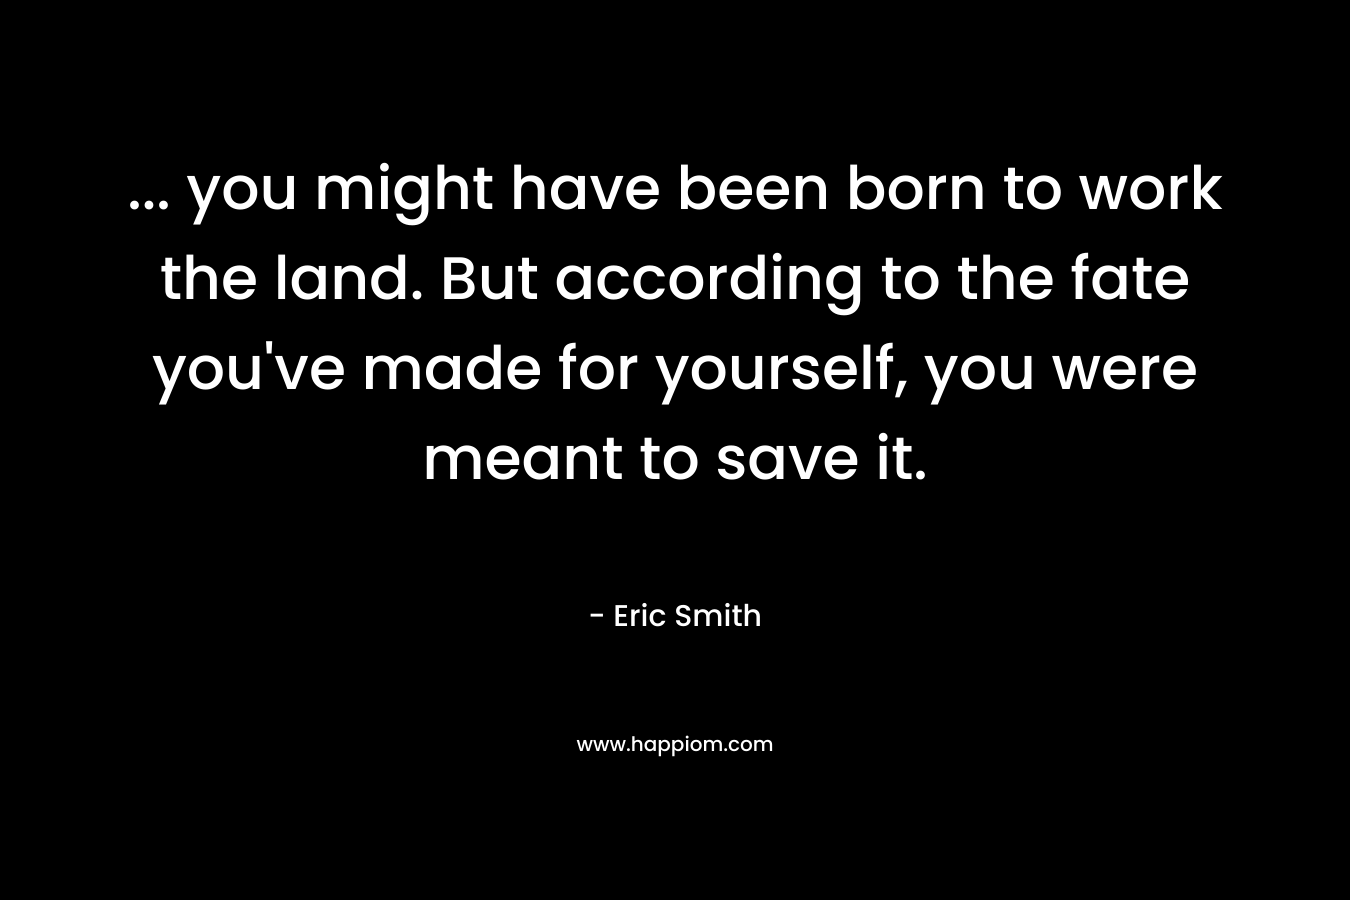 ... you might have been born to work the land. But according to the fate you've made for yourself, you were meant to save it.